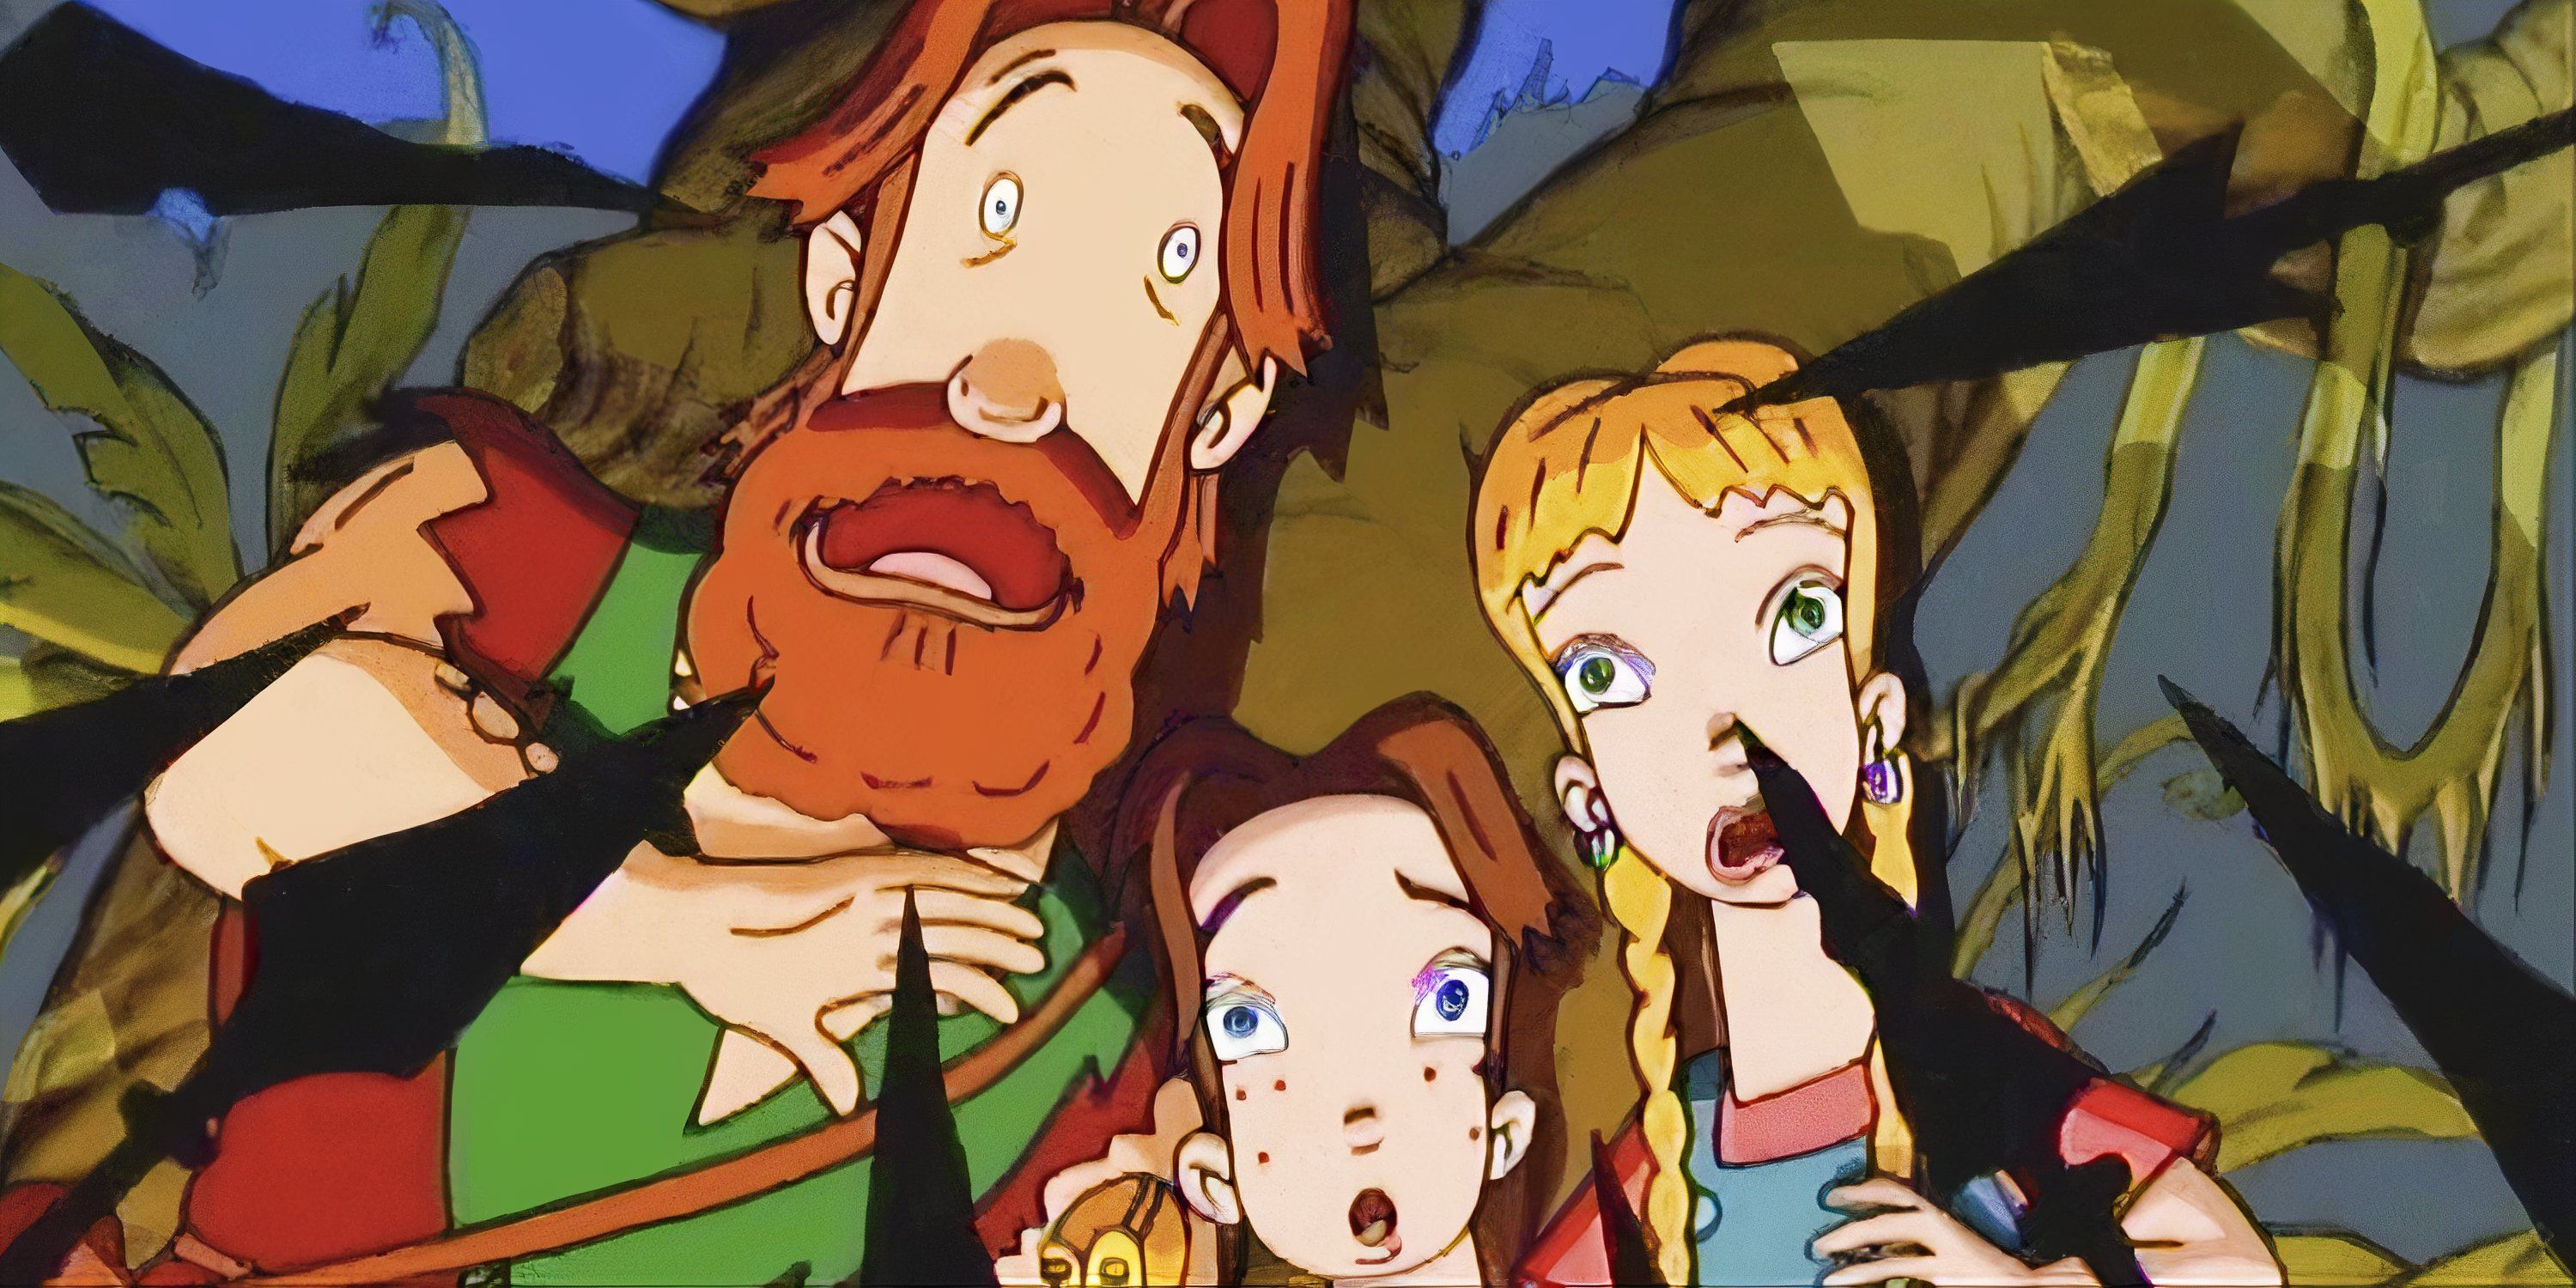 The characters of Jumanji the Animated Series being ambushed by creatures with spears.